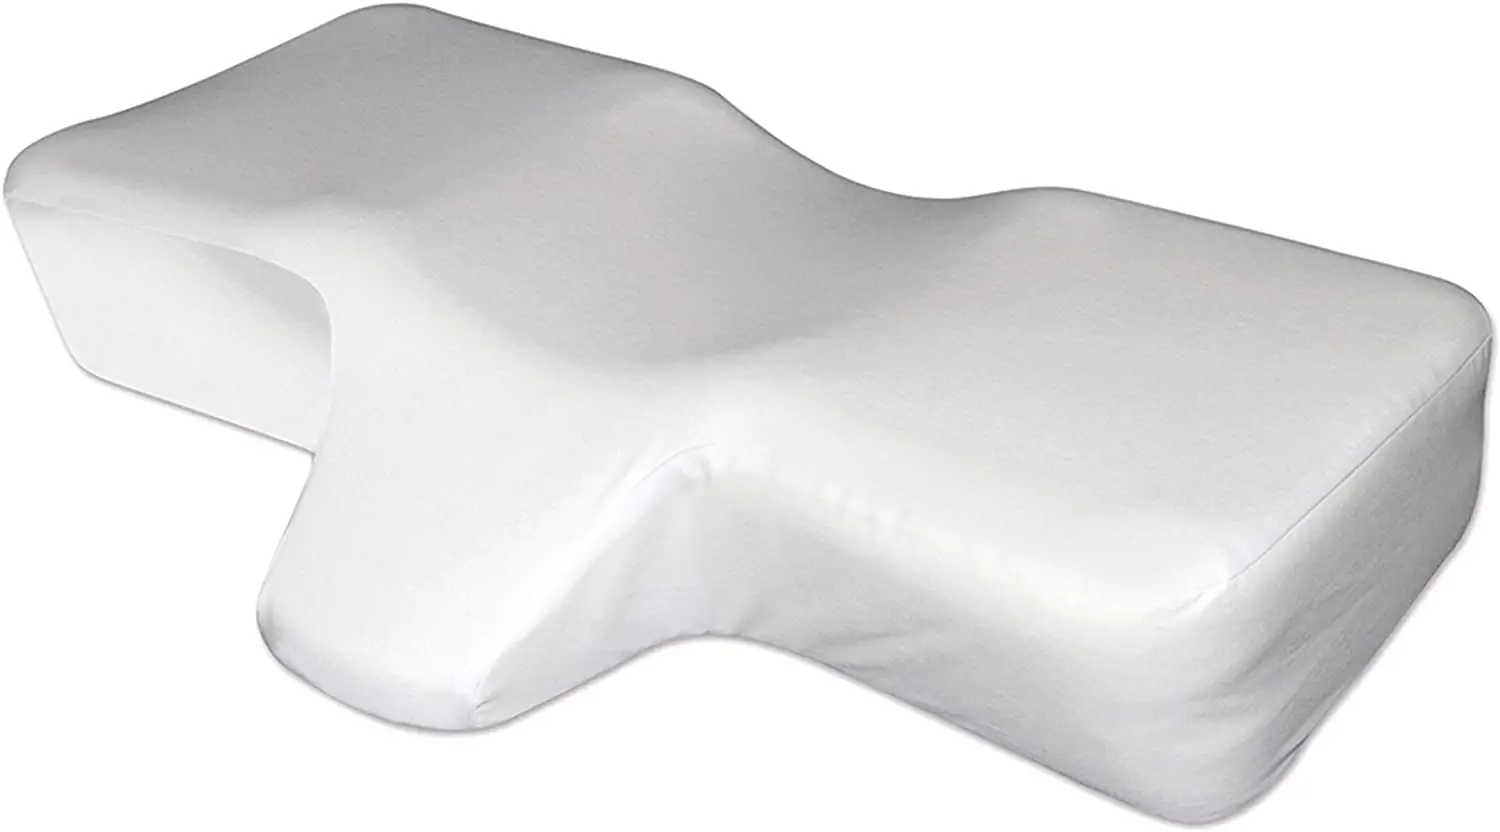 Therapeutica Sleeping Pillow Review – Best Support Pillow?